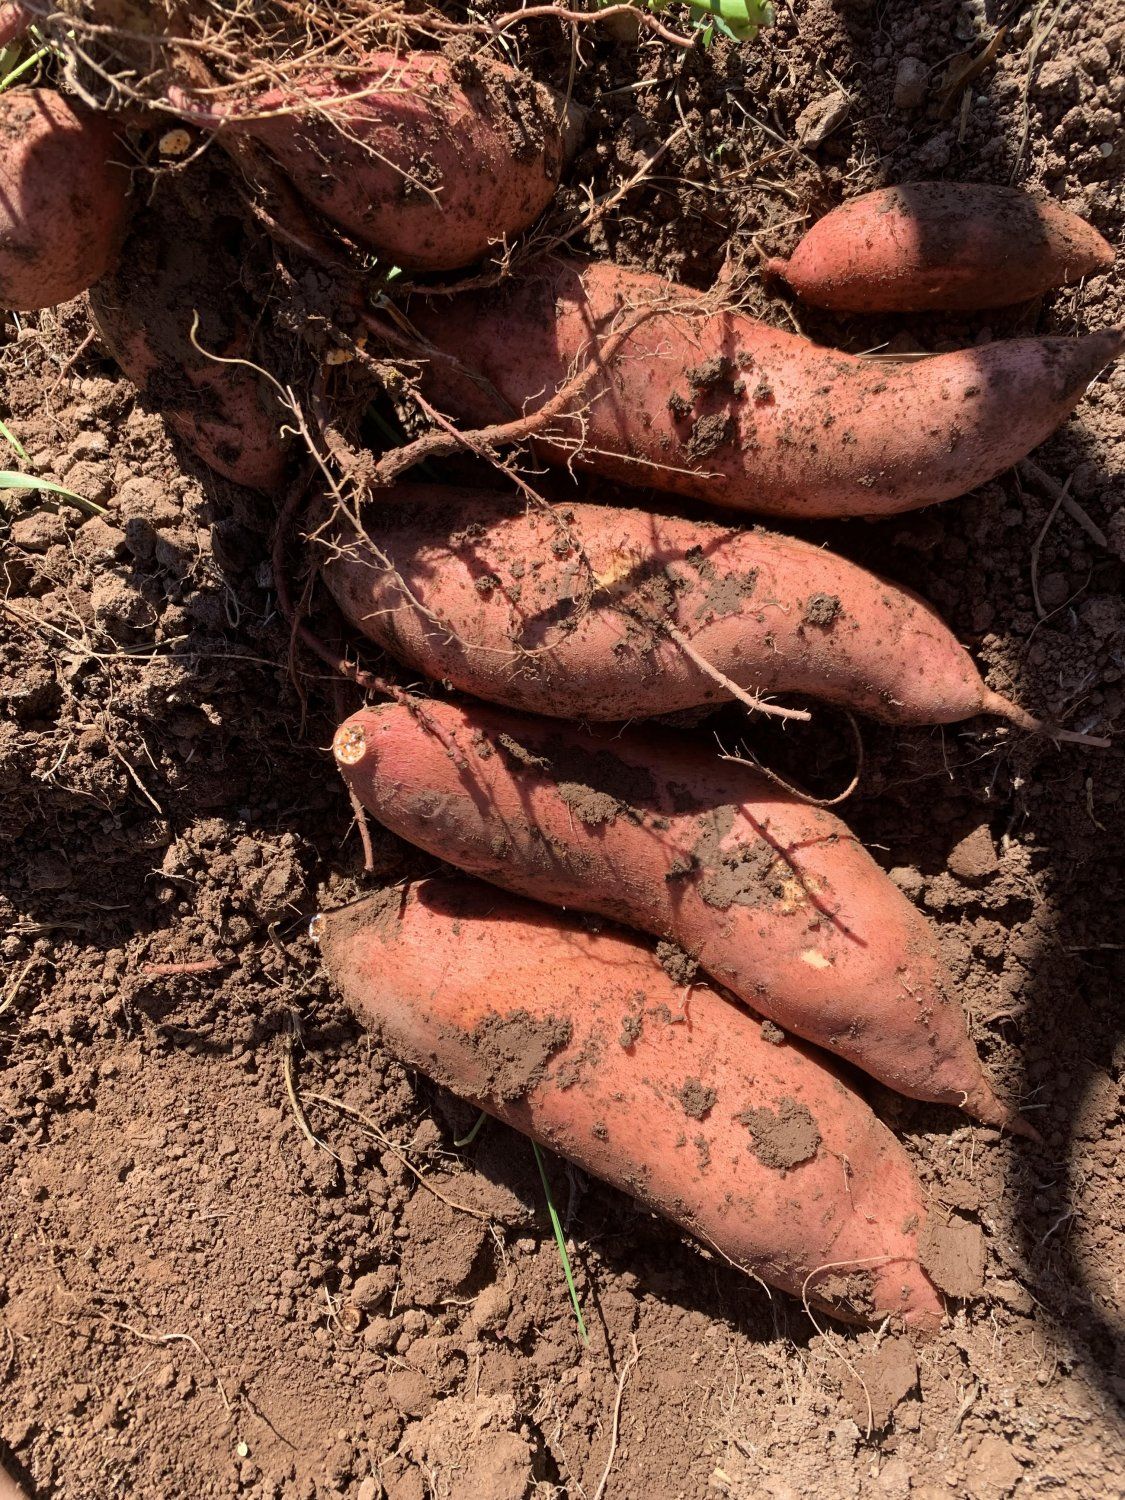 Ringing Fall in with Sweet Potatoes!